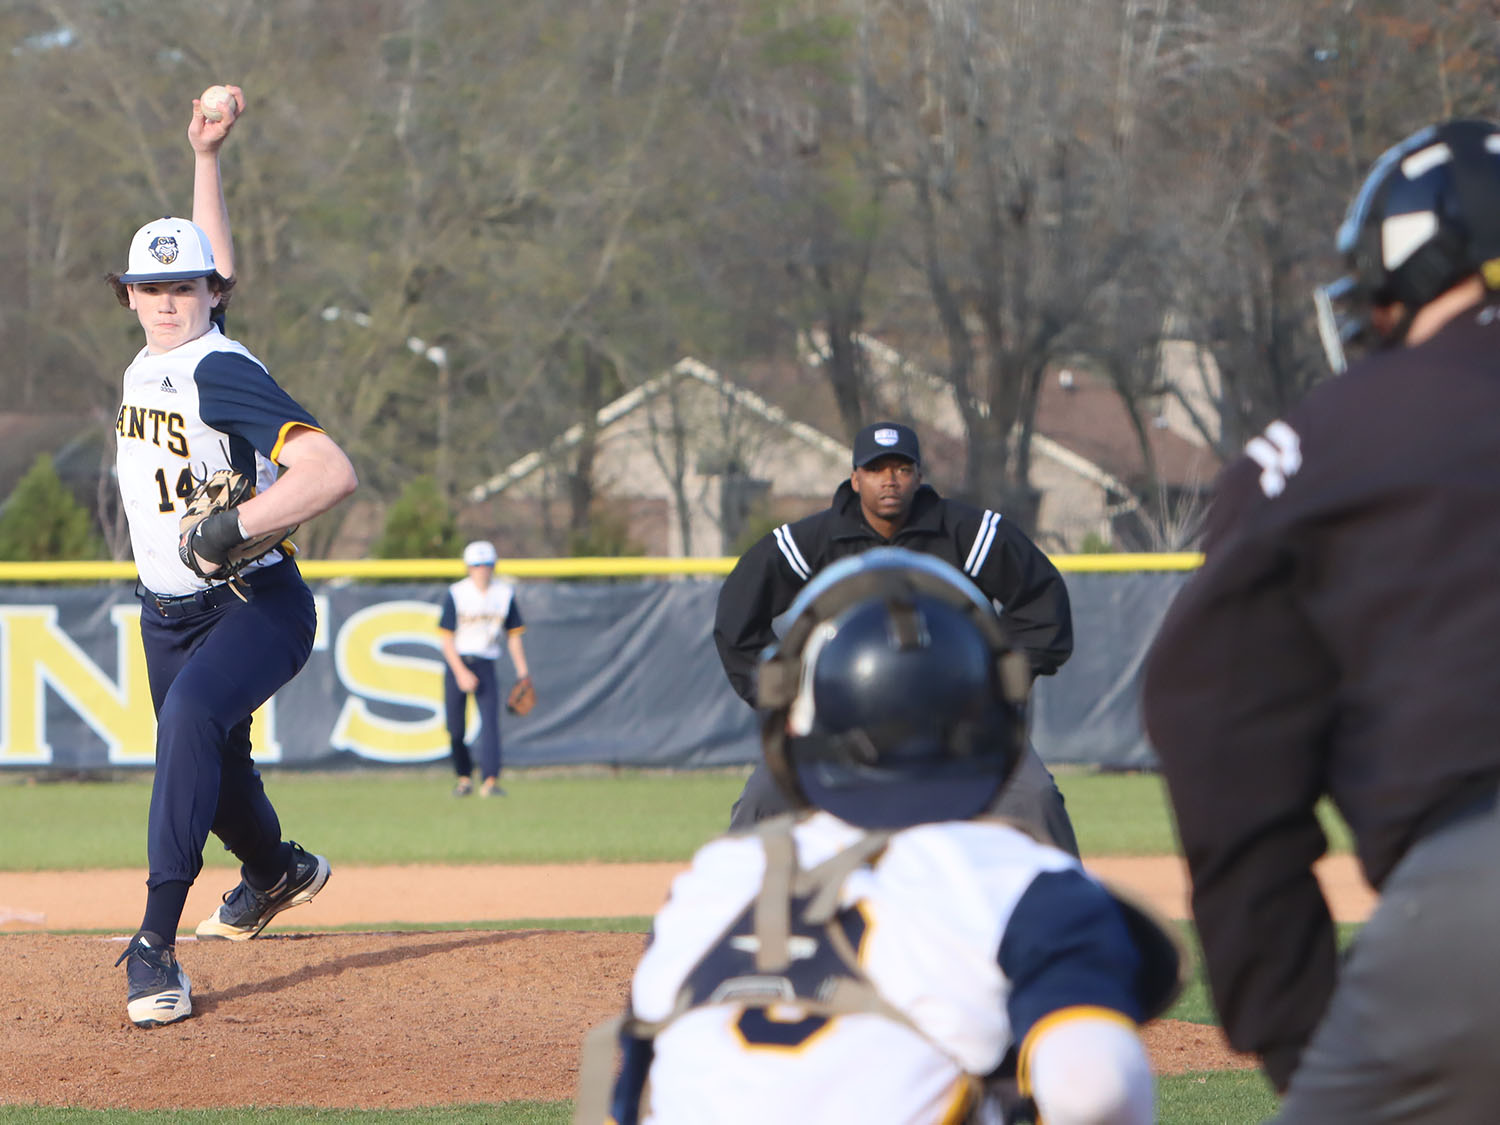 Williams dominant pitching & potent hitting leads to shutout of Eagles